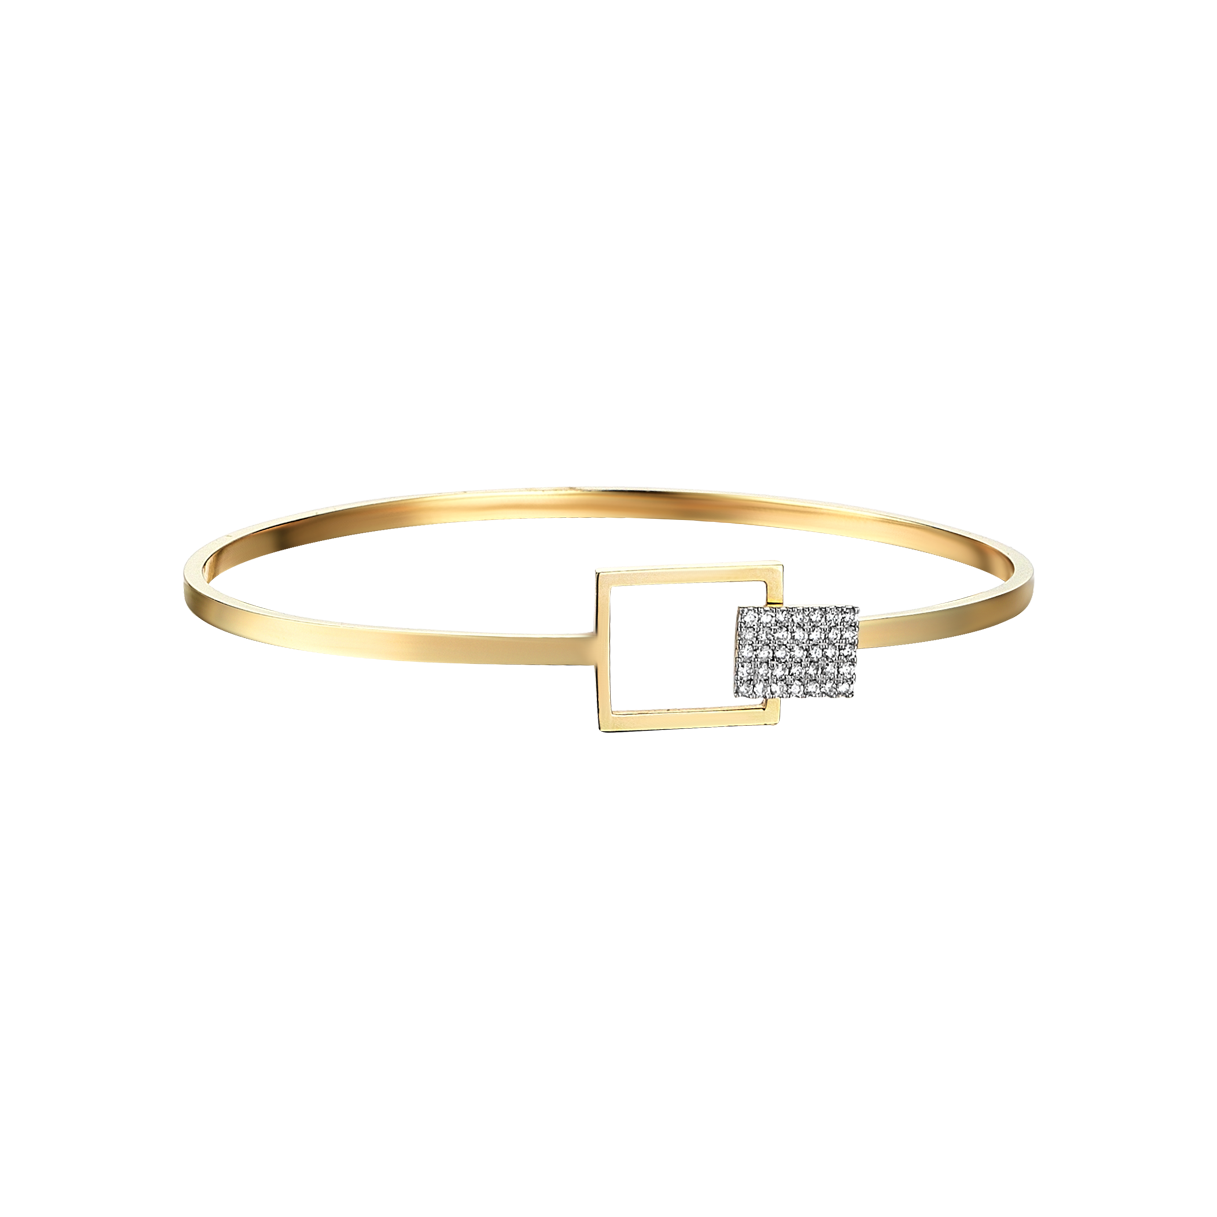 Geometric Squares Pave Bracelet in Yellow Gold - Her Story Shop